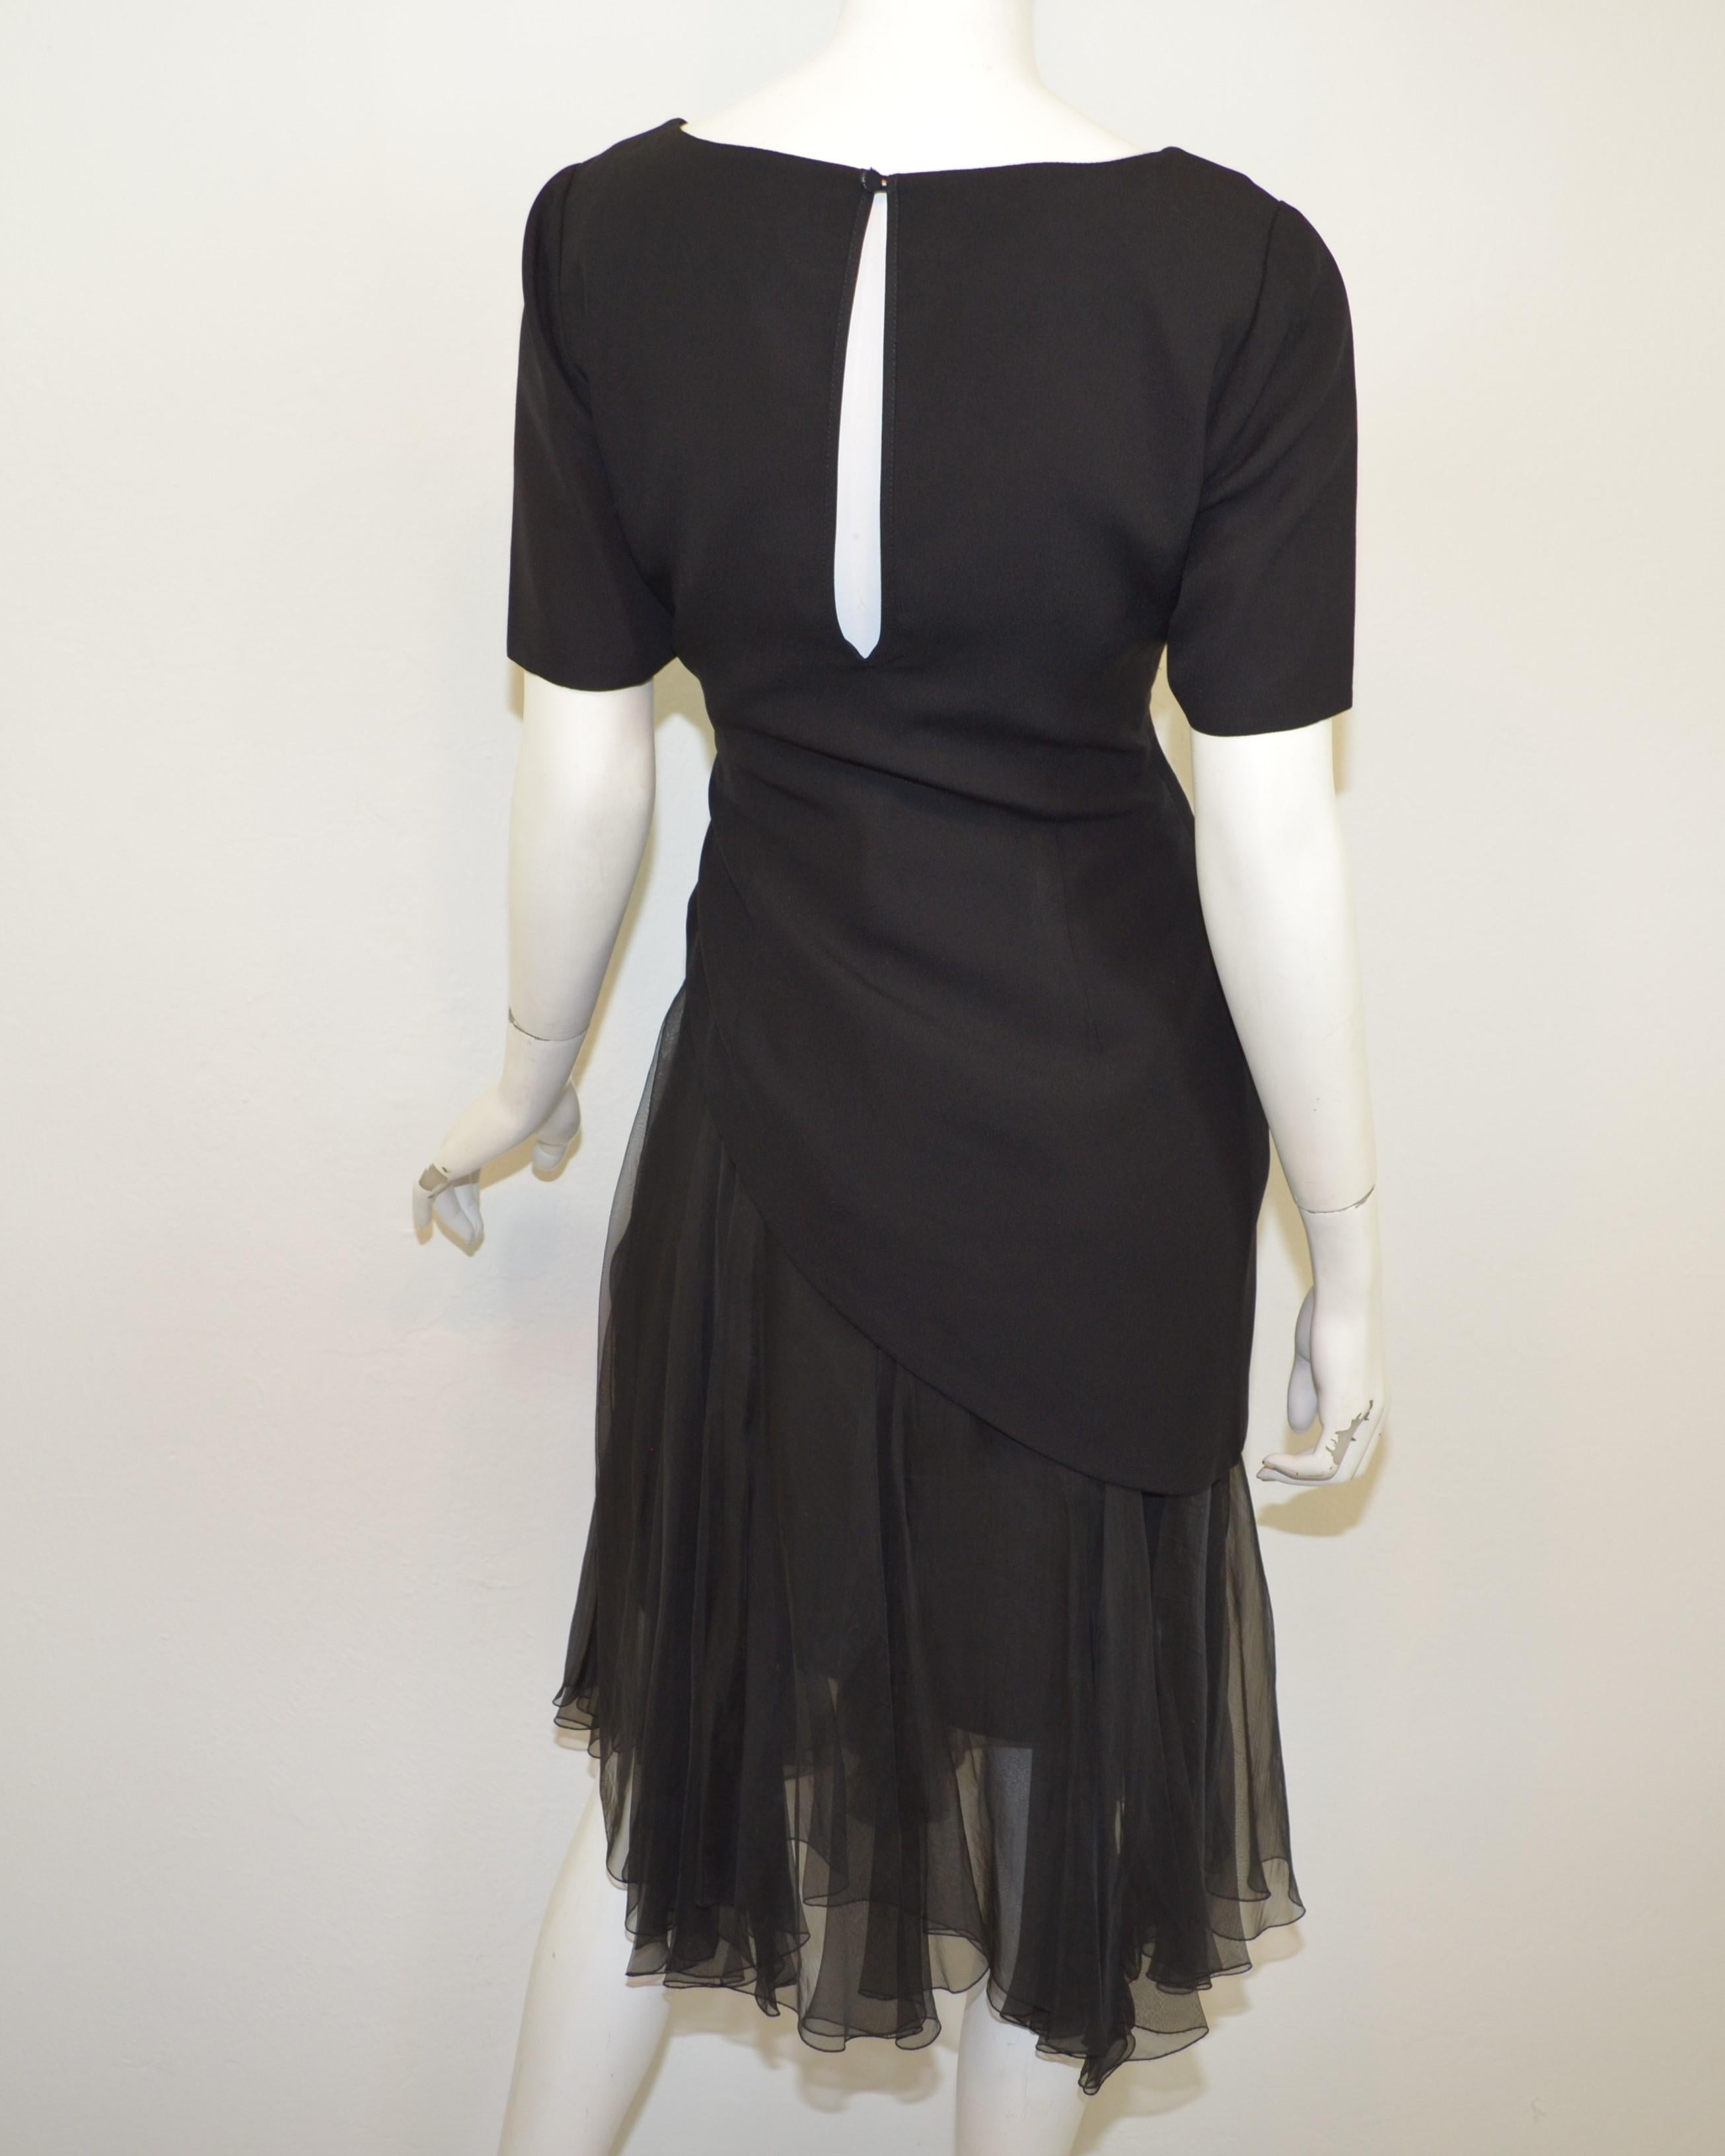 Late 1980's Christian Dior Boutique chiffon skirt with separate asymmetrical fitted bodice in black crepe. The ensemble has a numbered label and handwritten tag identifying the collection as 41C. Made in France.

Measurements:
Top - bust 36”,